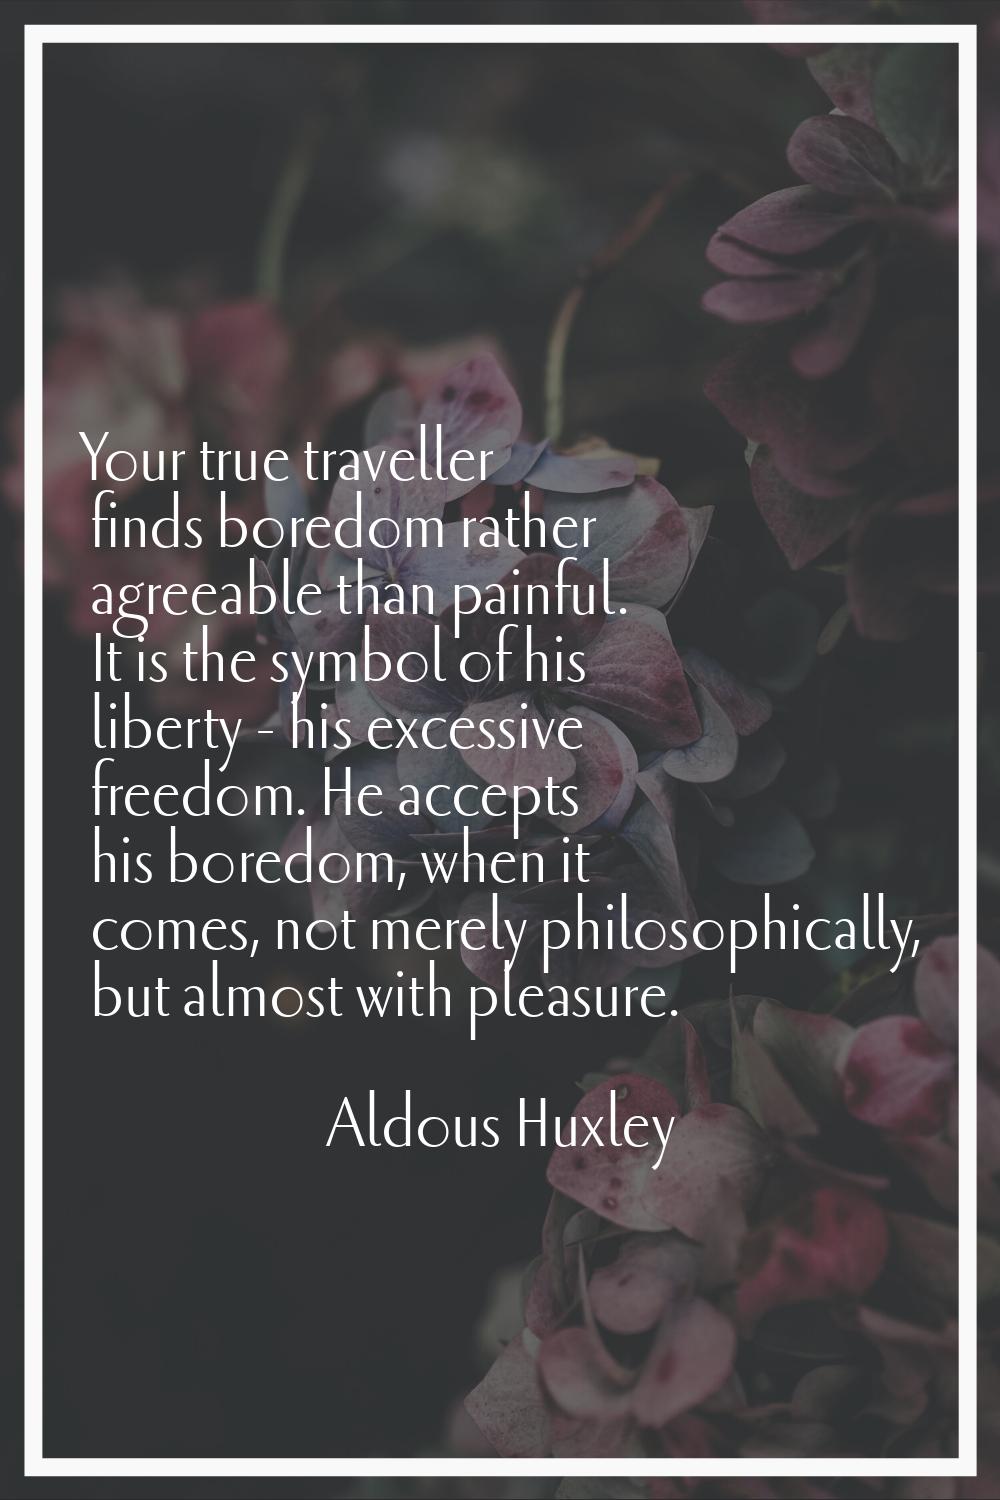 Your true traveller finds boredom rather agreeable than painful. It is the symbol of his liberty - 